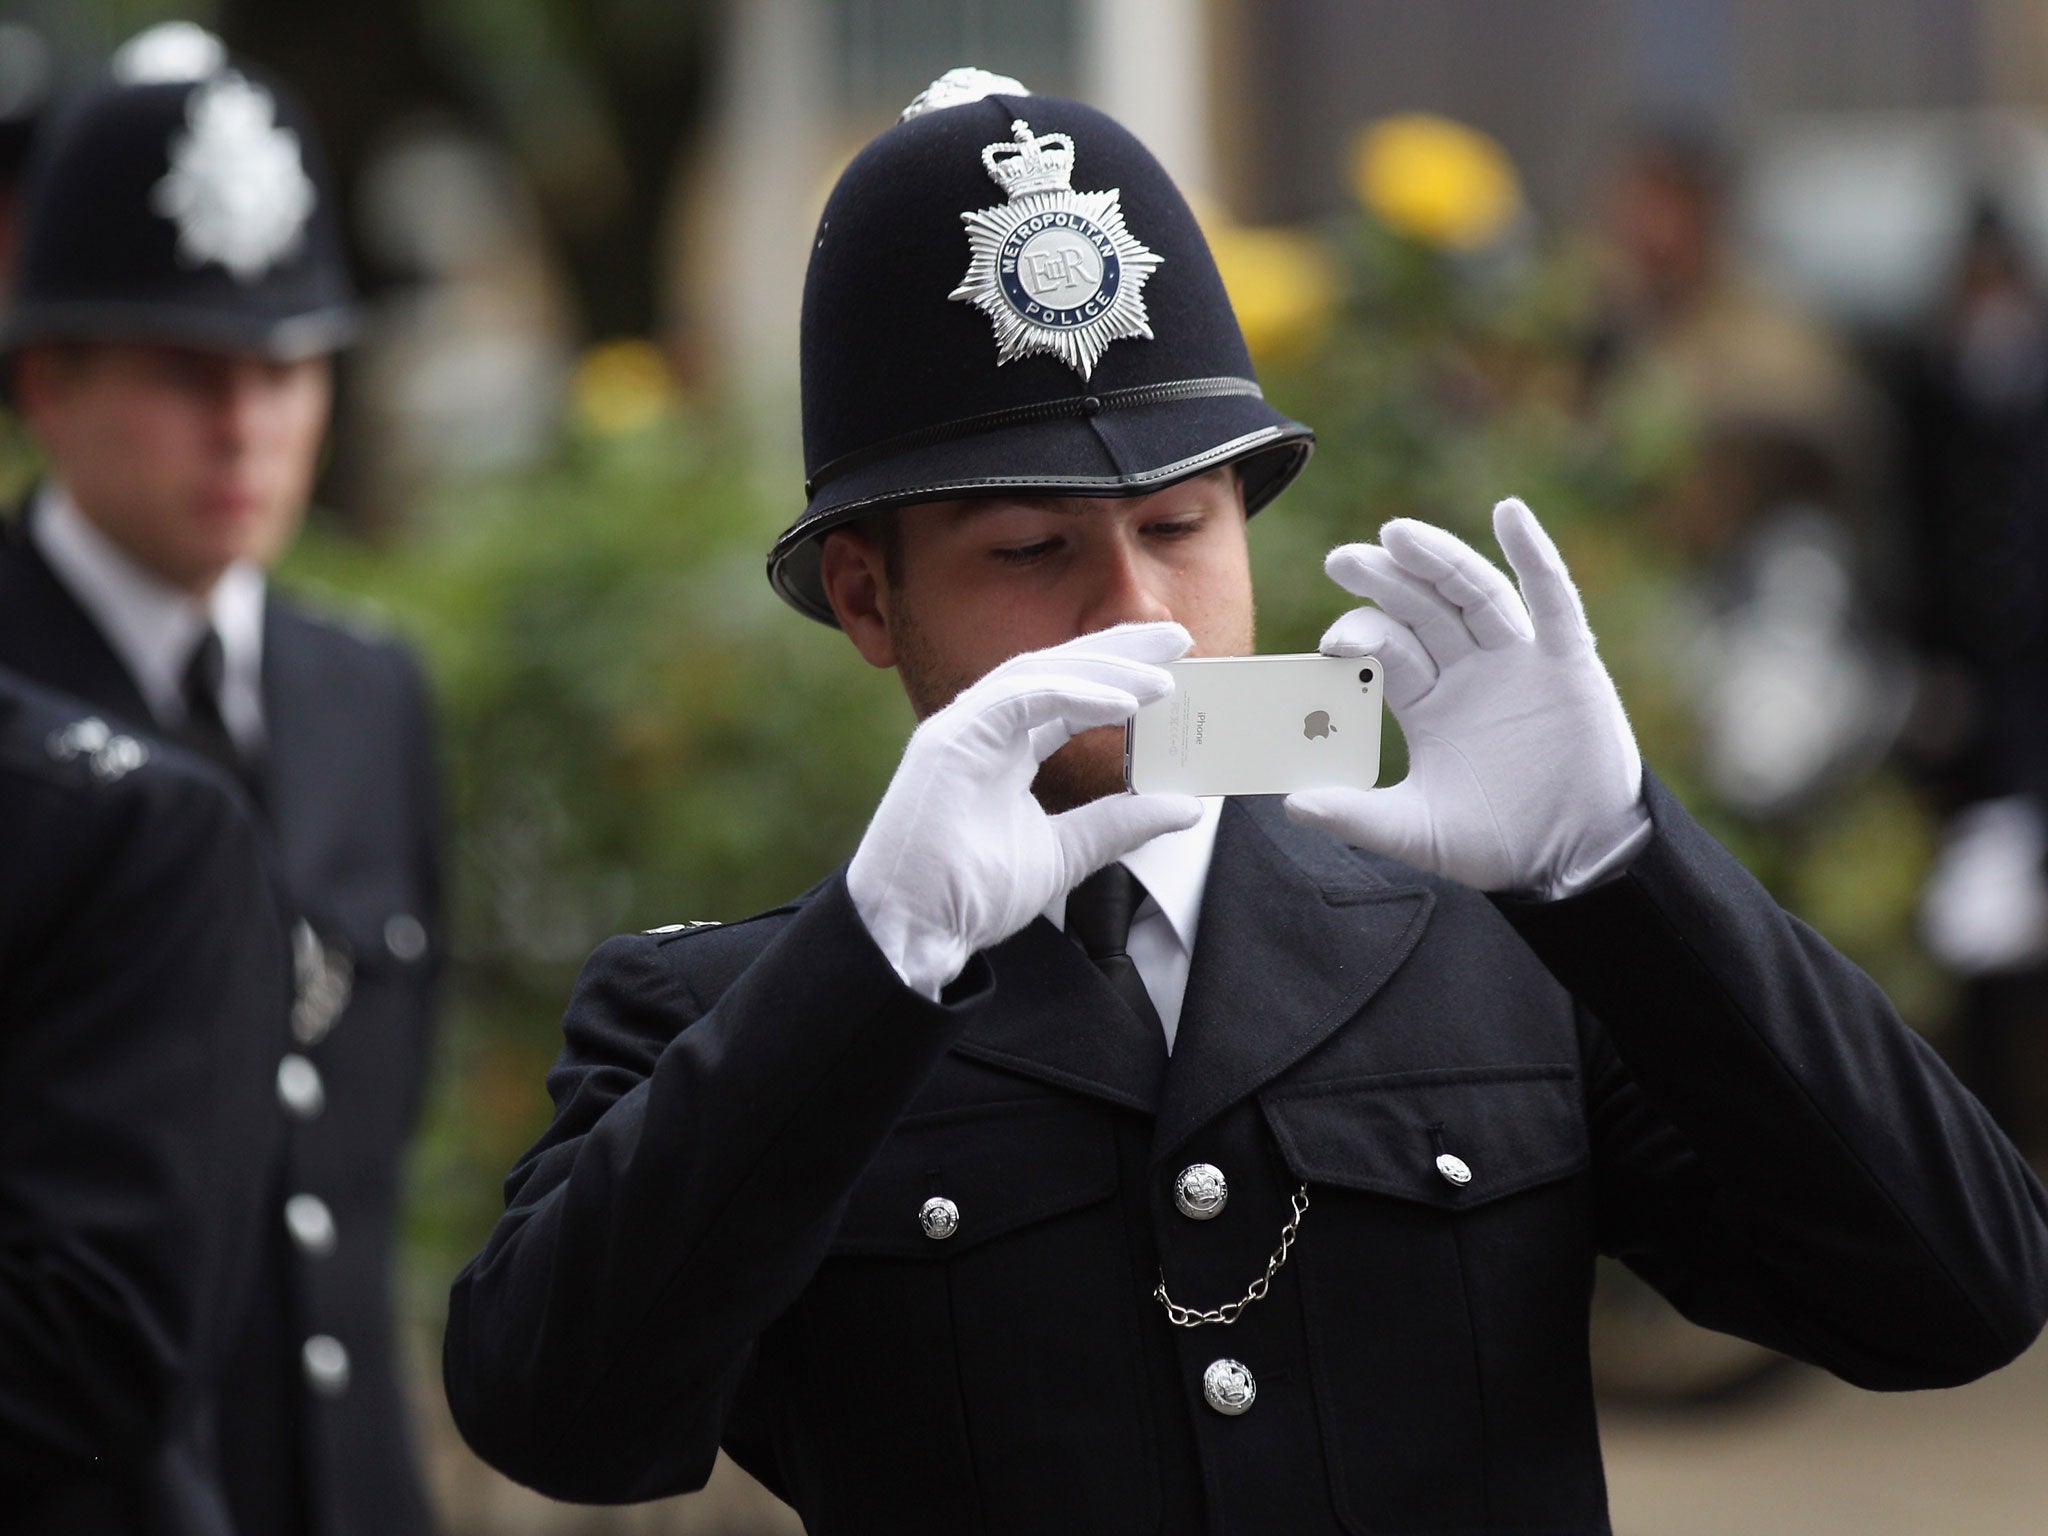 The Met may issue up to 32,000 officers with mobile phones